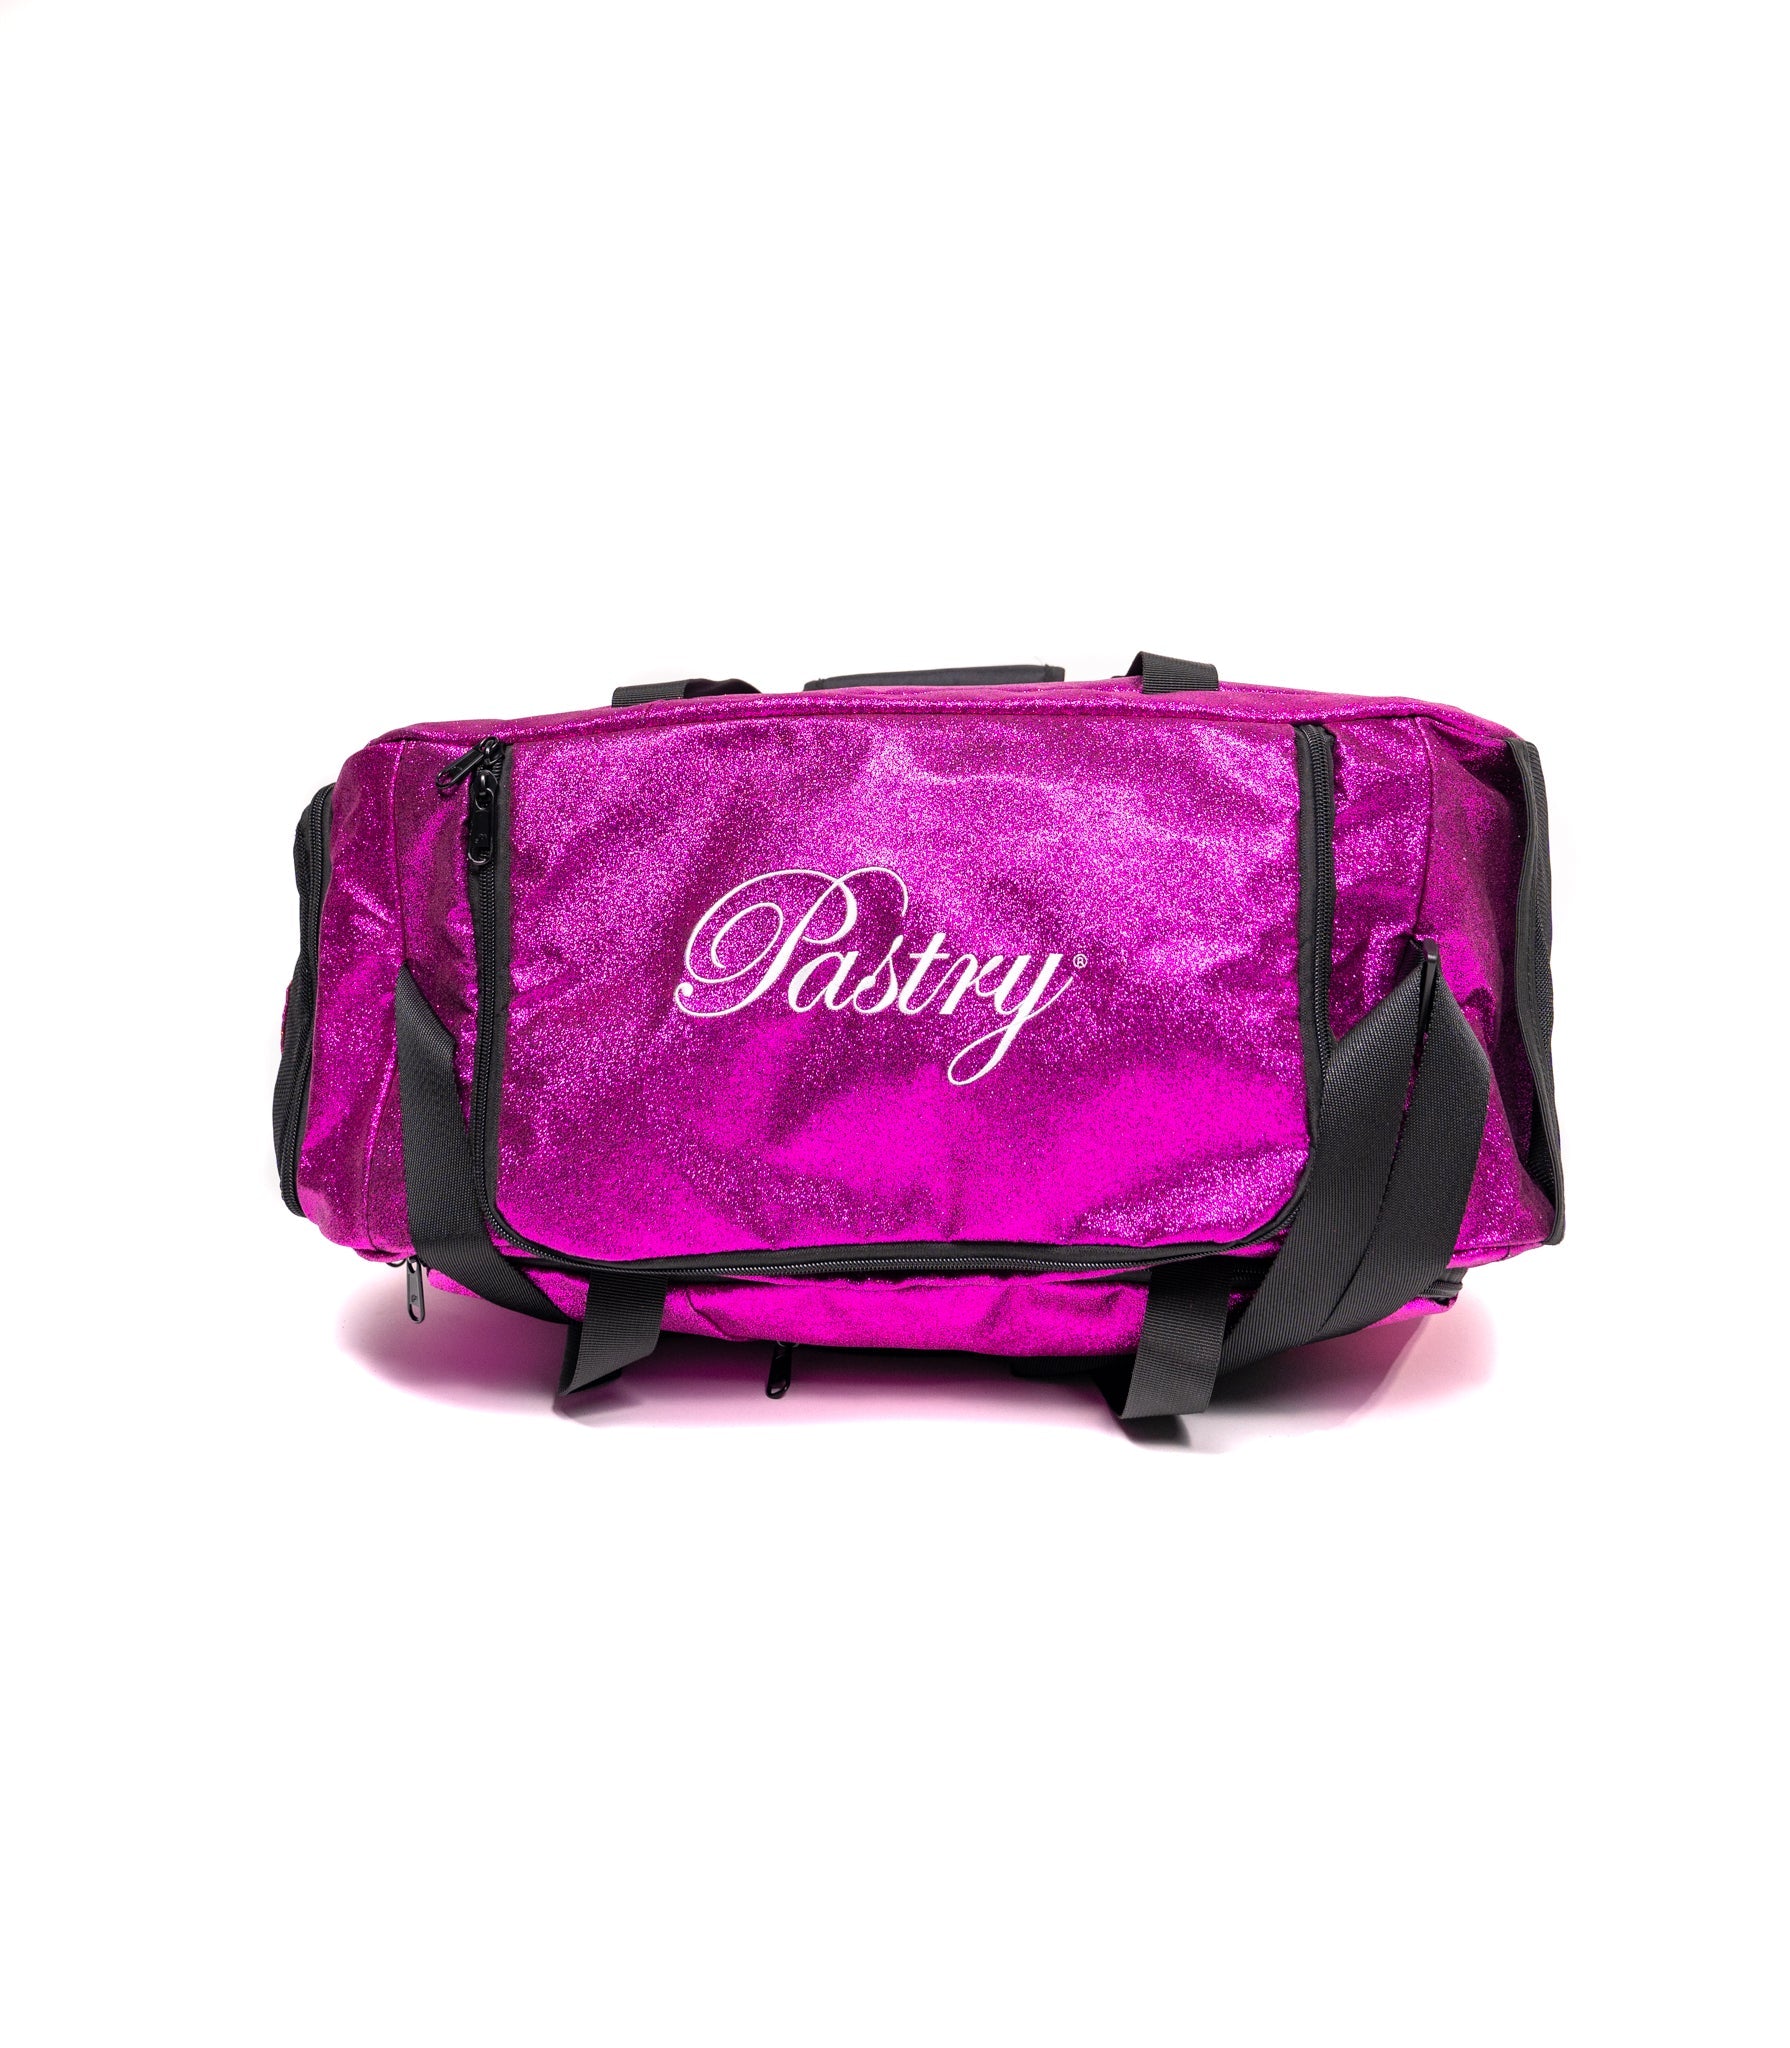 Pastry Duffle Bag Glitter Hot Pink